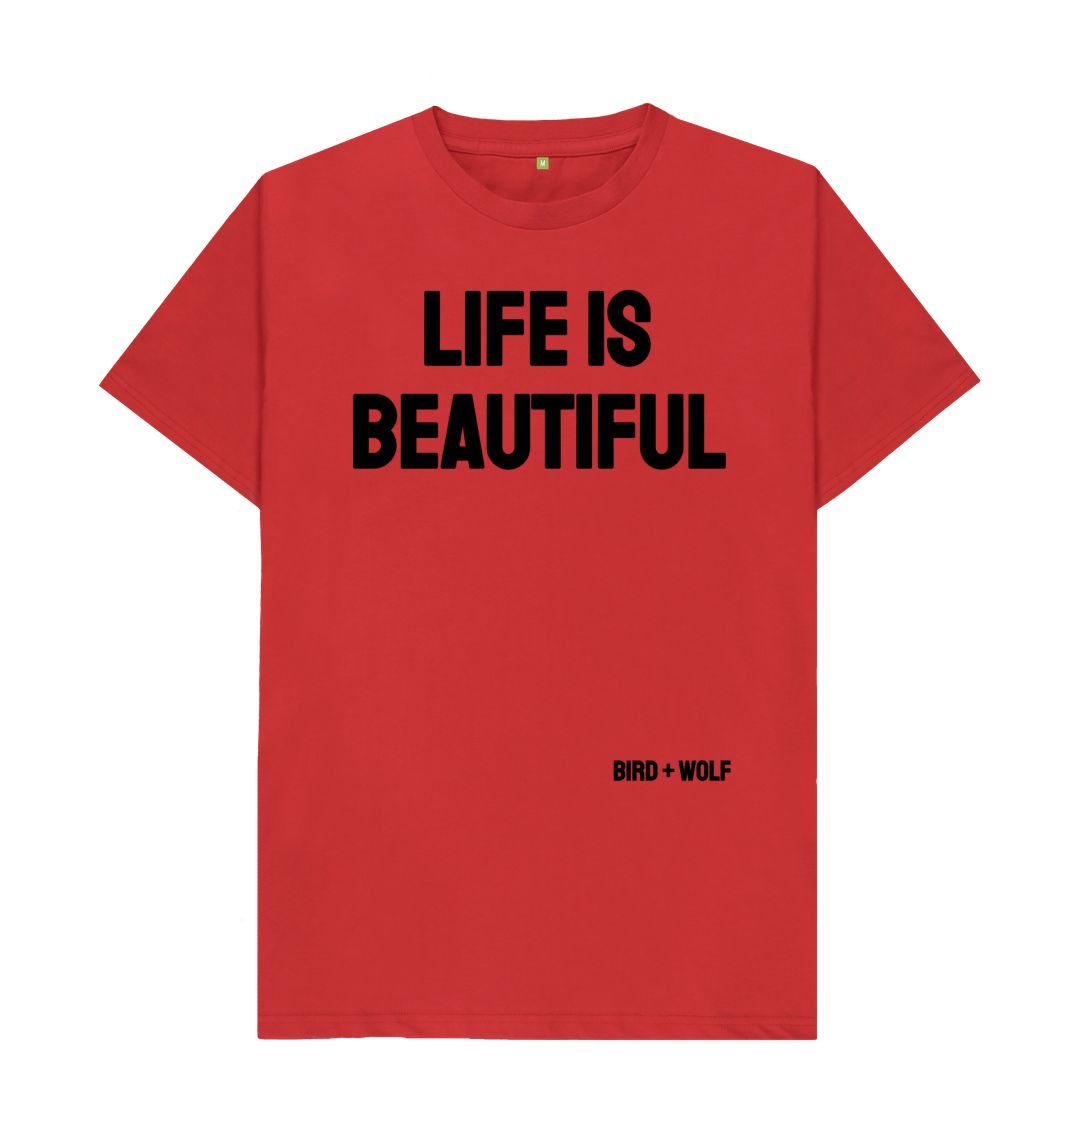 Red Life is Beautiful Classic Tee